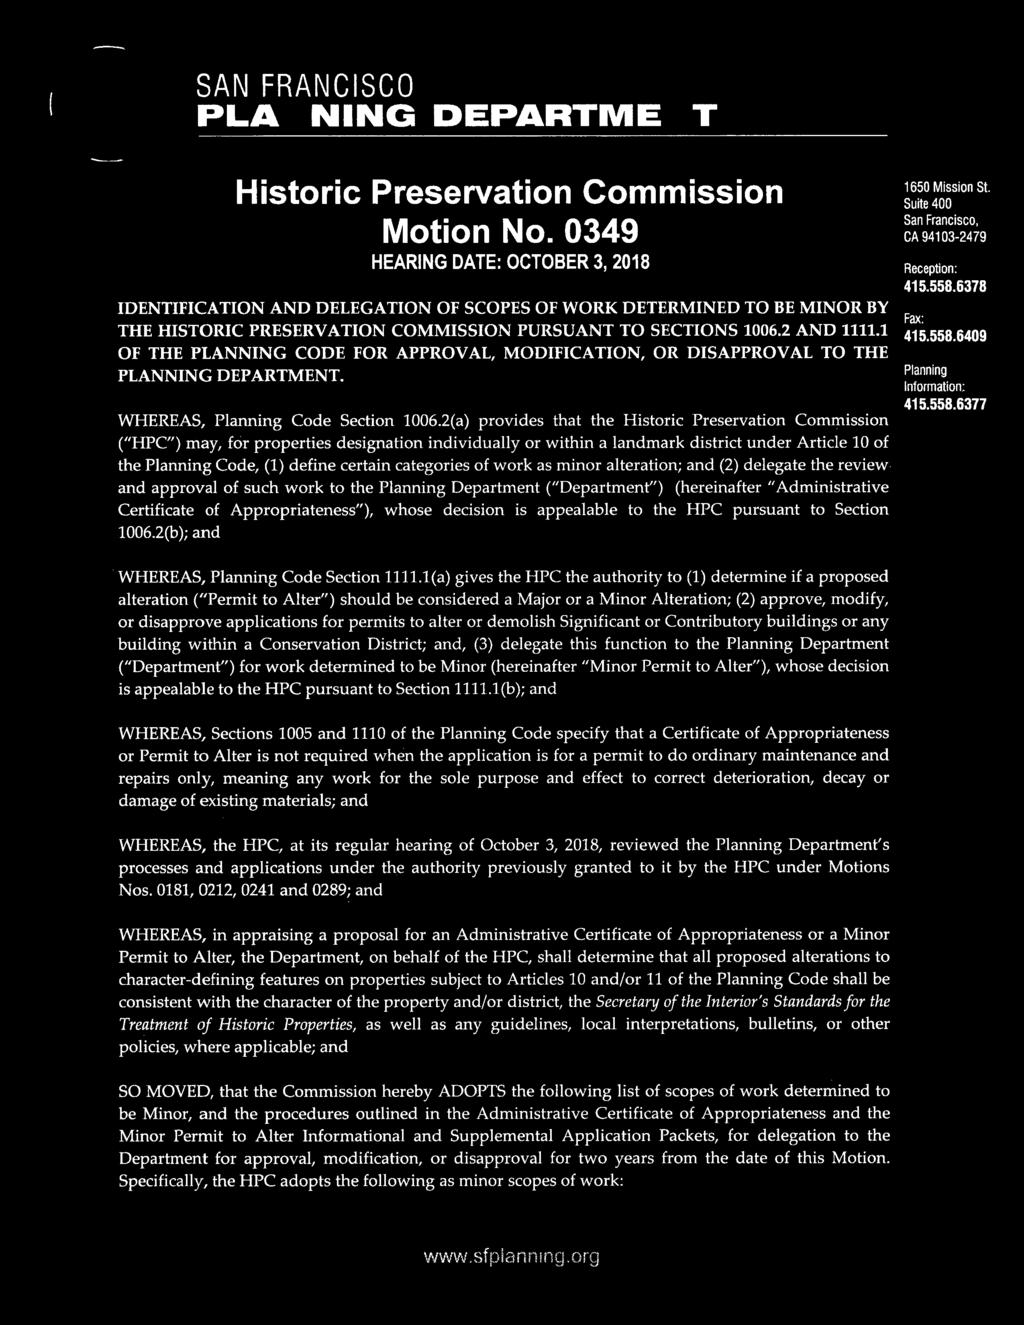 6378 IDENTIFICATION AND DELEGATION OF SCOPES OF WORK DETERMINED TO BE MINOR BY Fax: THE HISTORIC PRESERVATION COMMISSION PURSUANT TO SECTIONS 1006.2 AND 1111.1 415.558.